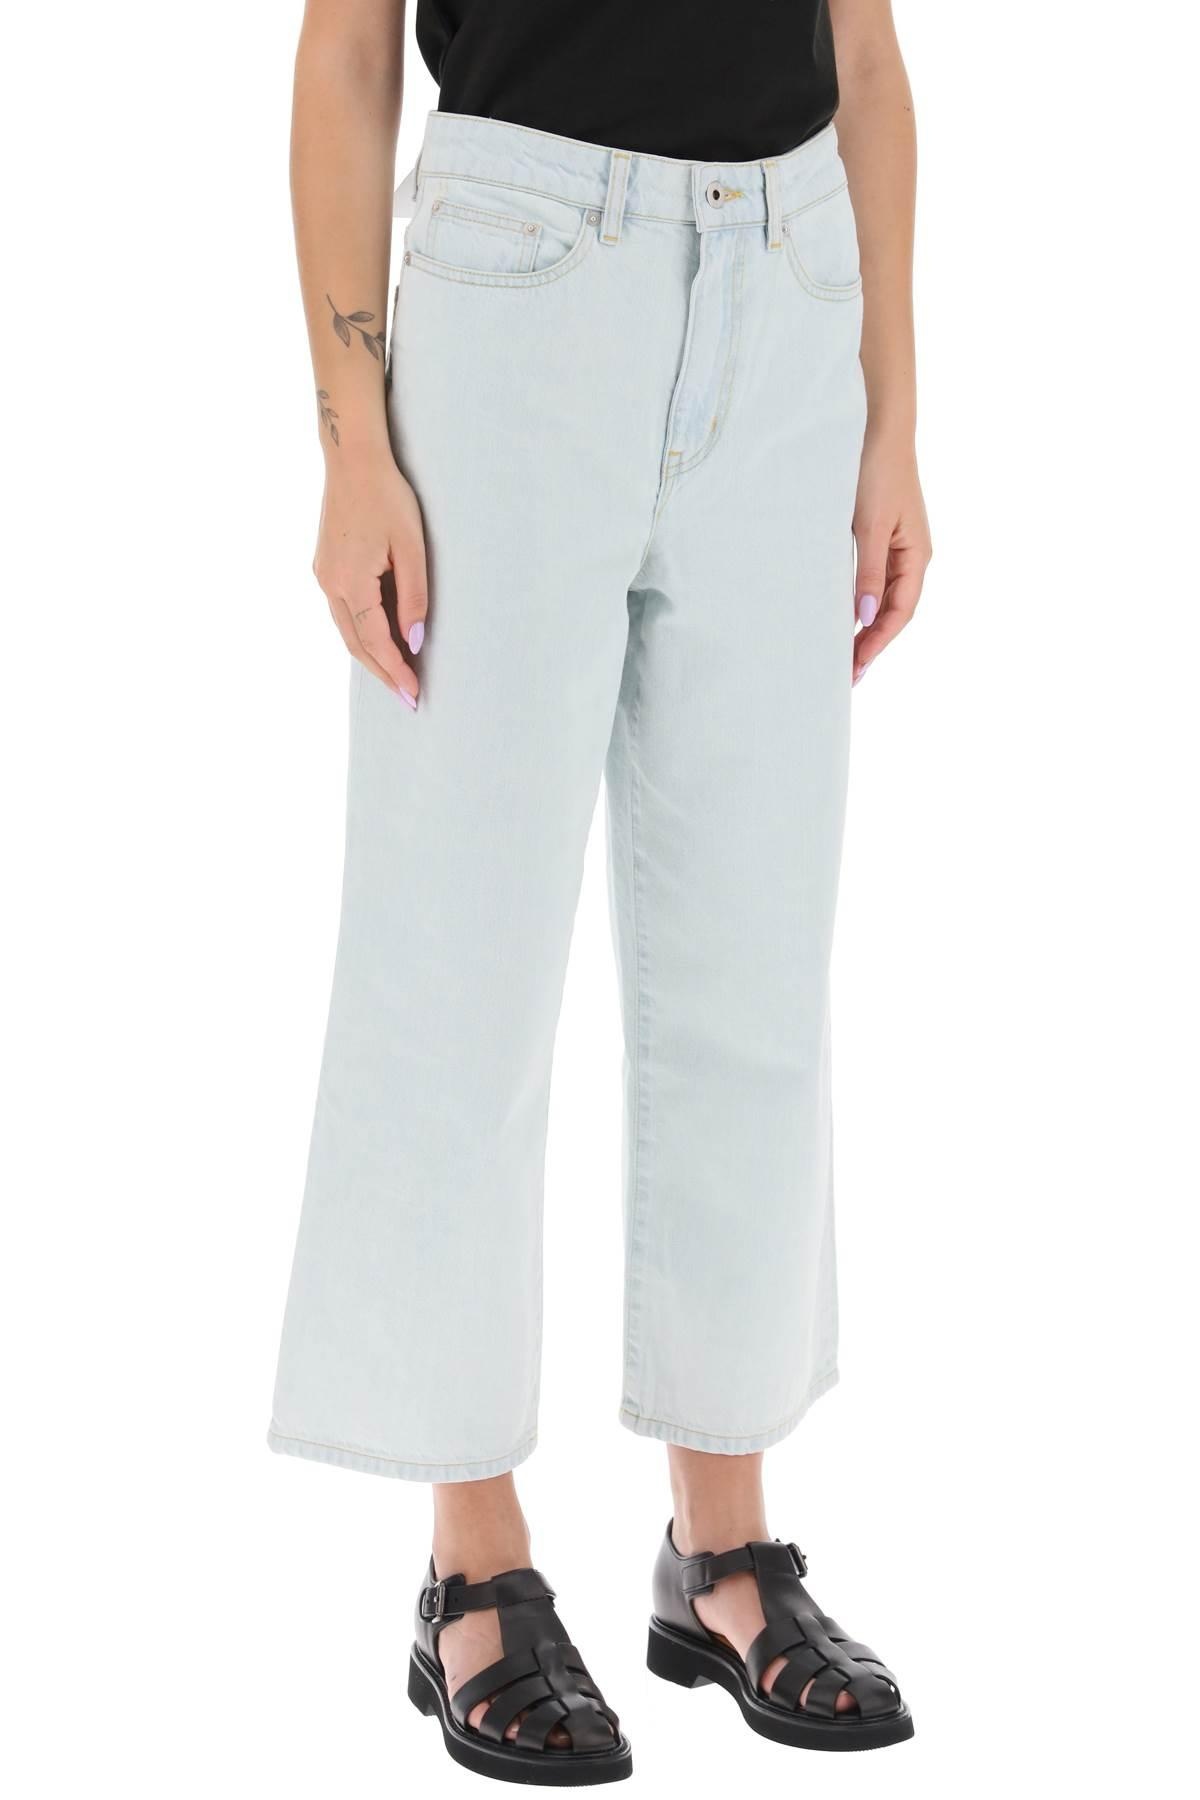 Kenzo 'Sumire' Cropped Jeans With Wide Leg - 3